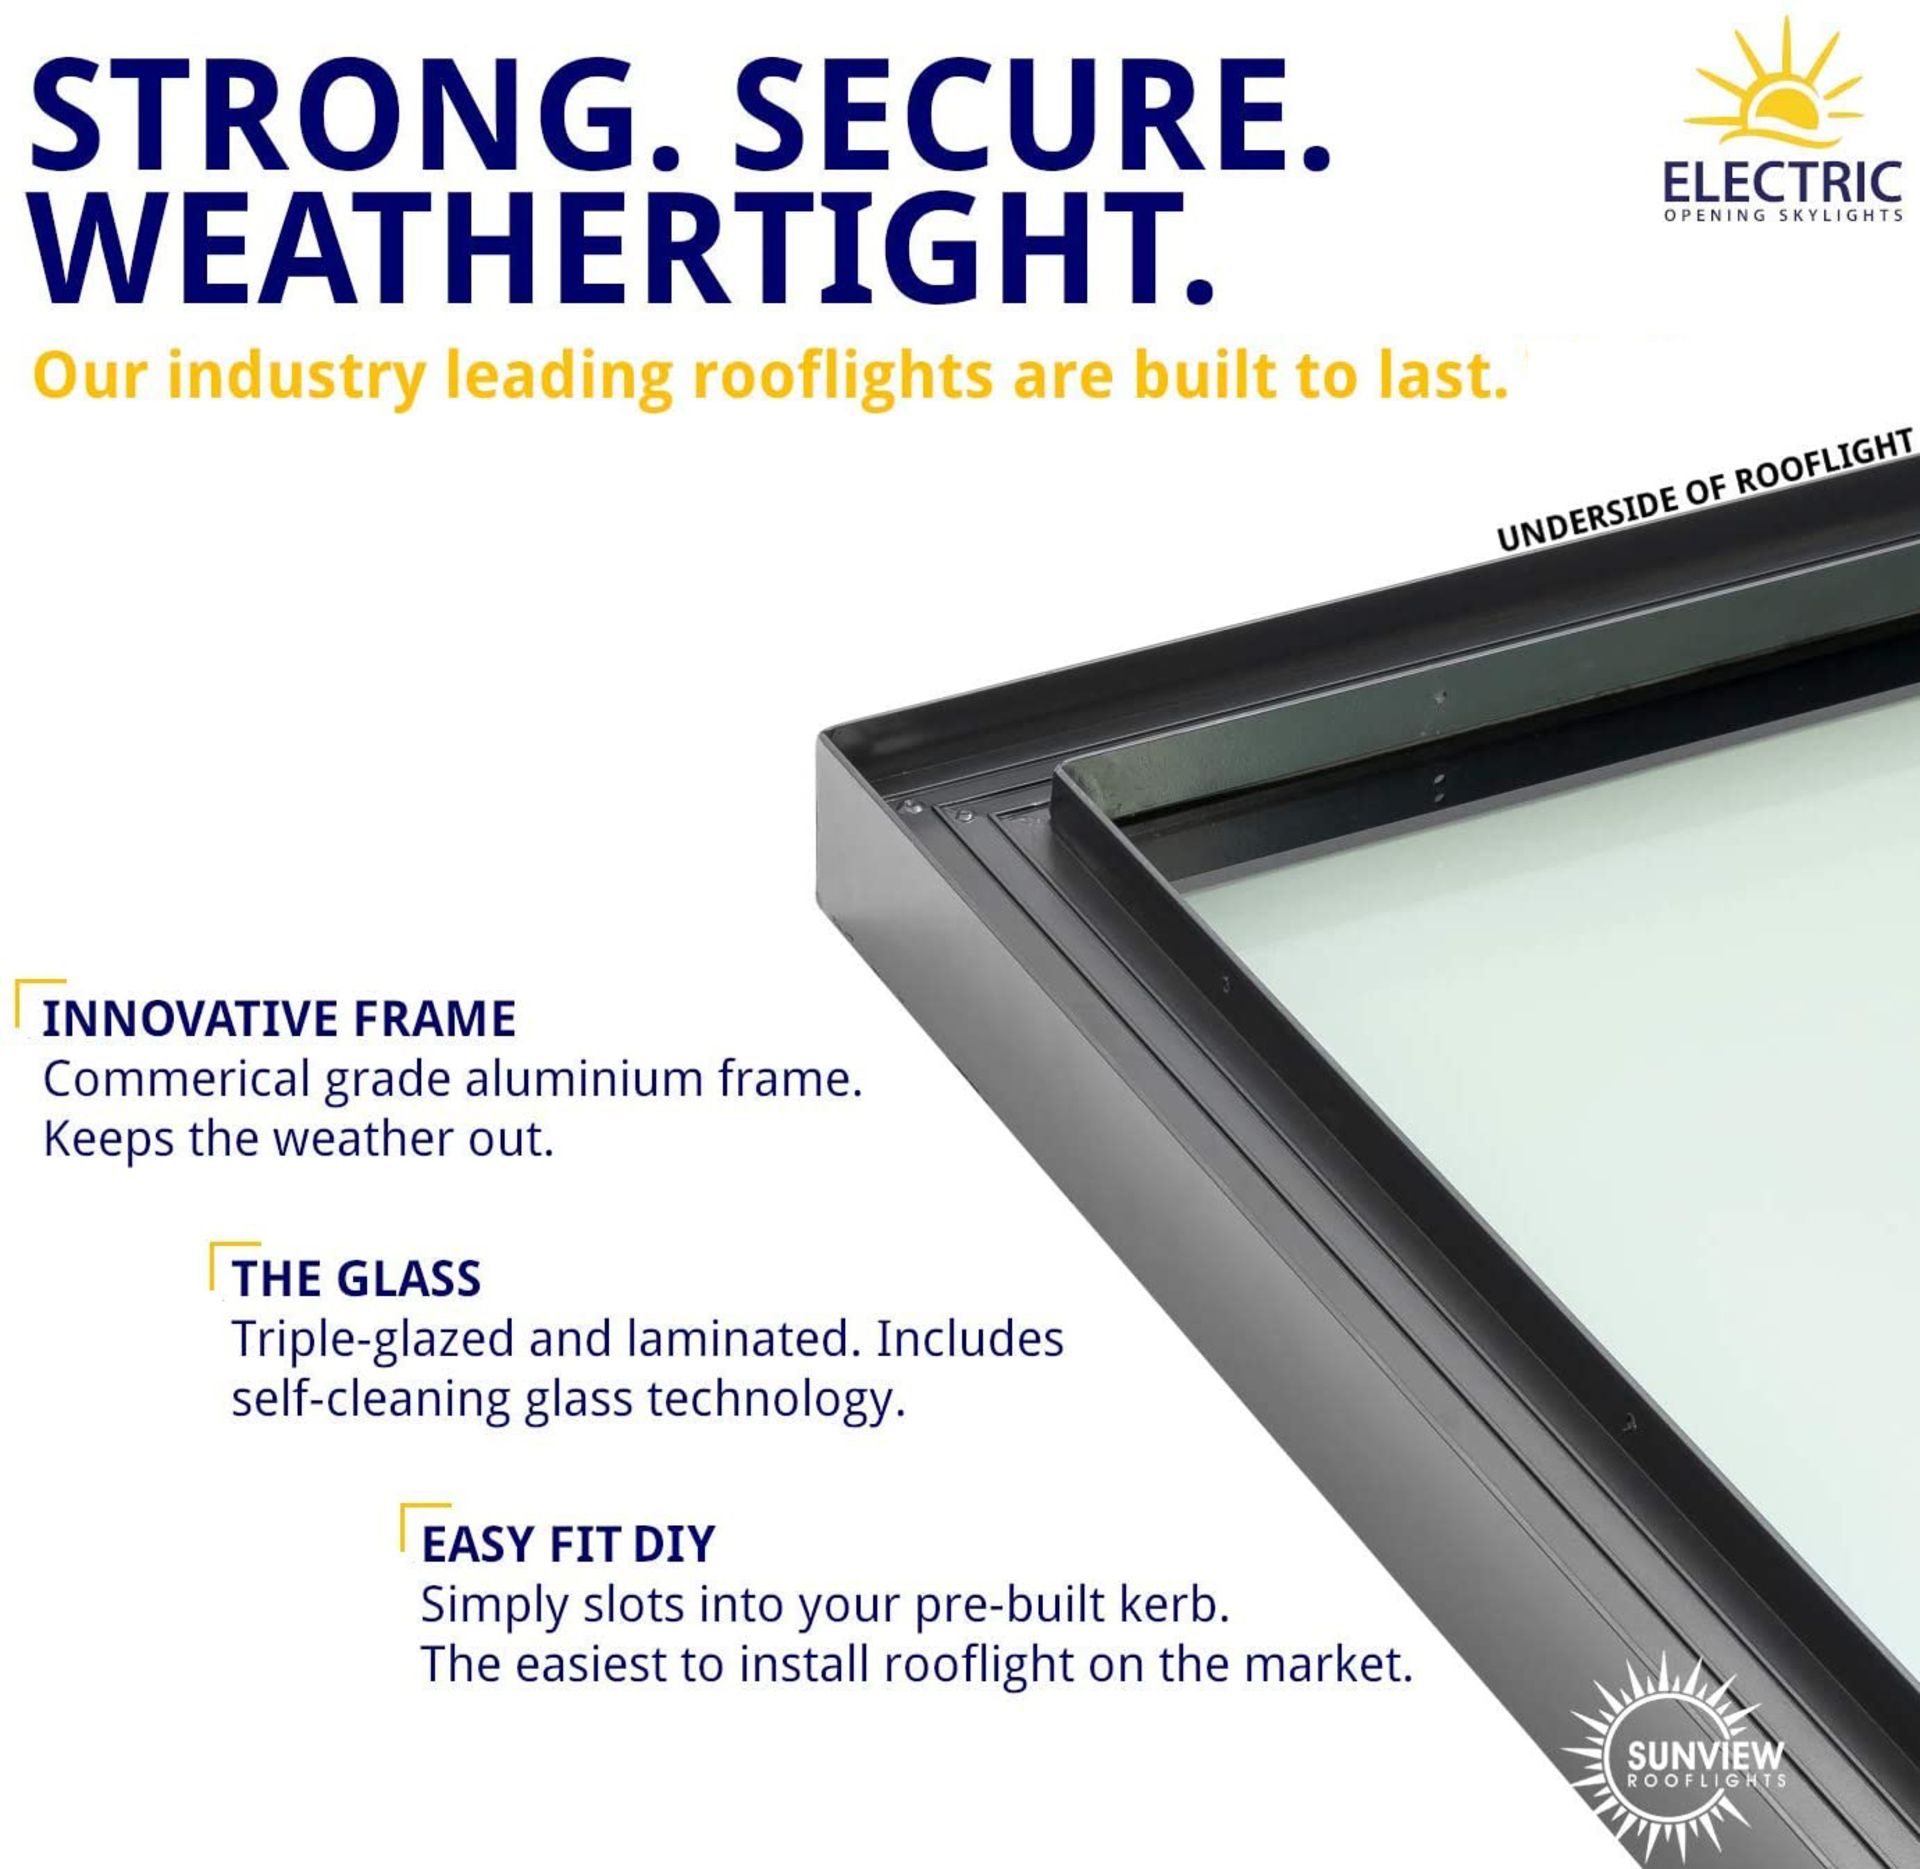 Panoroof (EOS) Fixed Aluminium Triple-Glazed Laminated Skylight with Self-Cleaning Glass - - Image 2 of 6